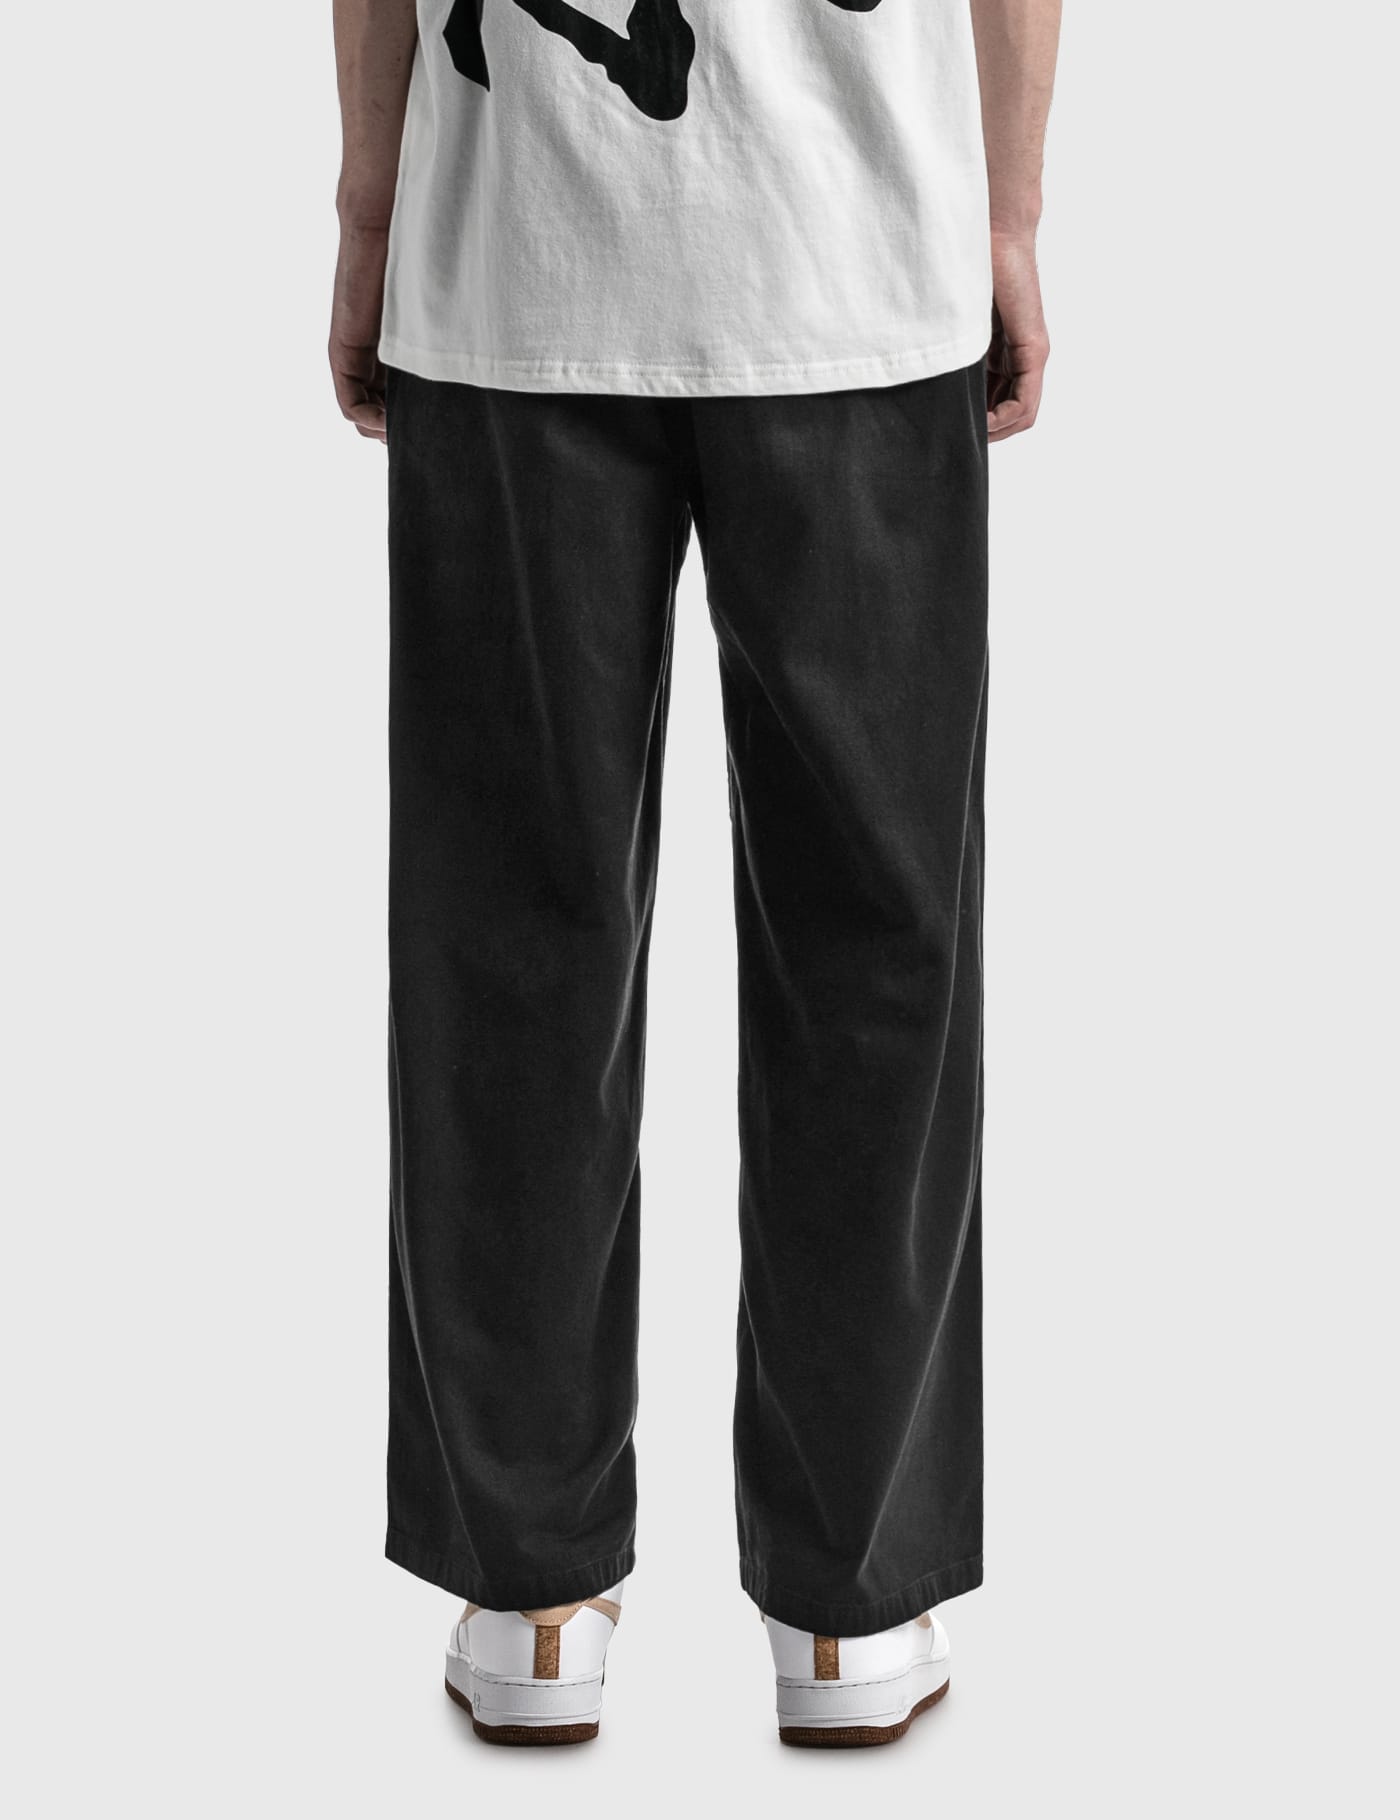 Gramicci - Wide Pants | HBX - Globally Curated Fashion and 